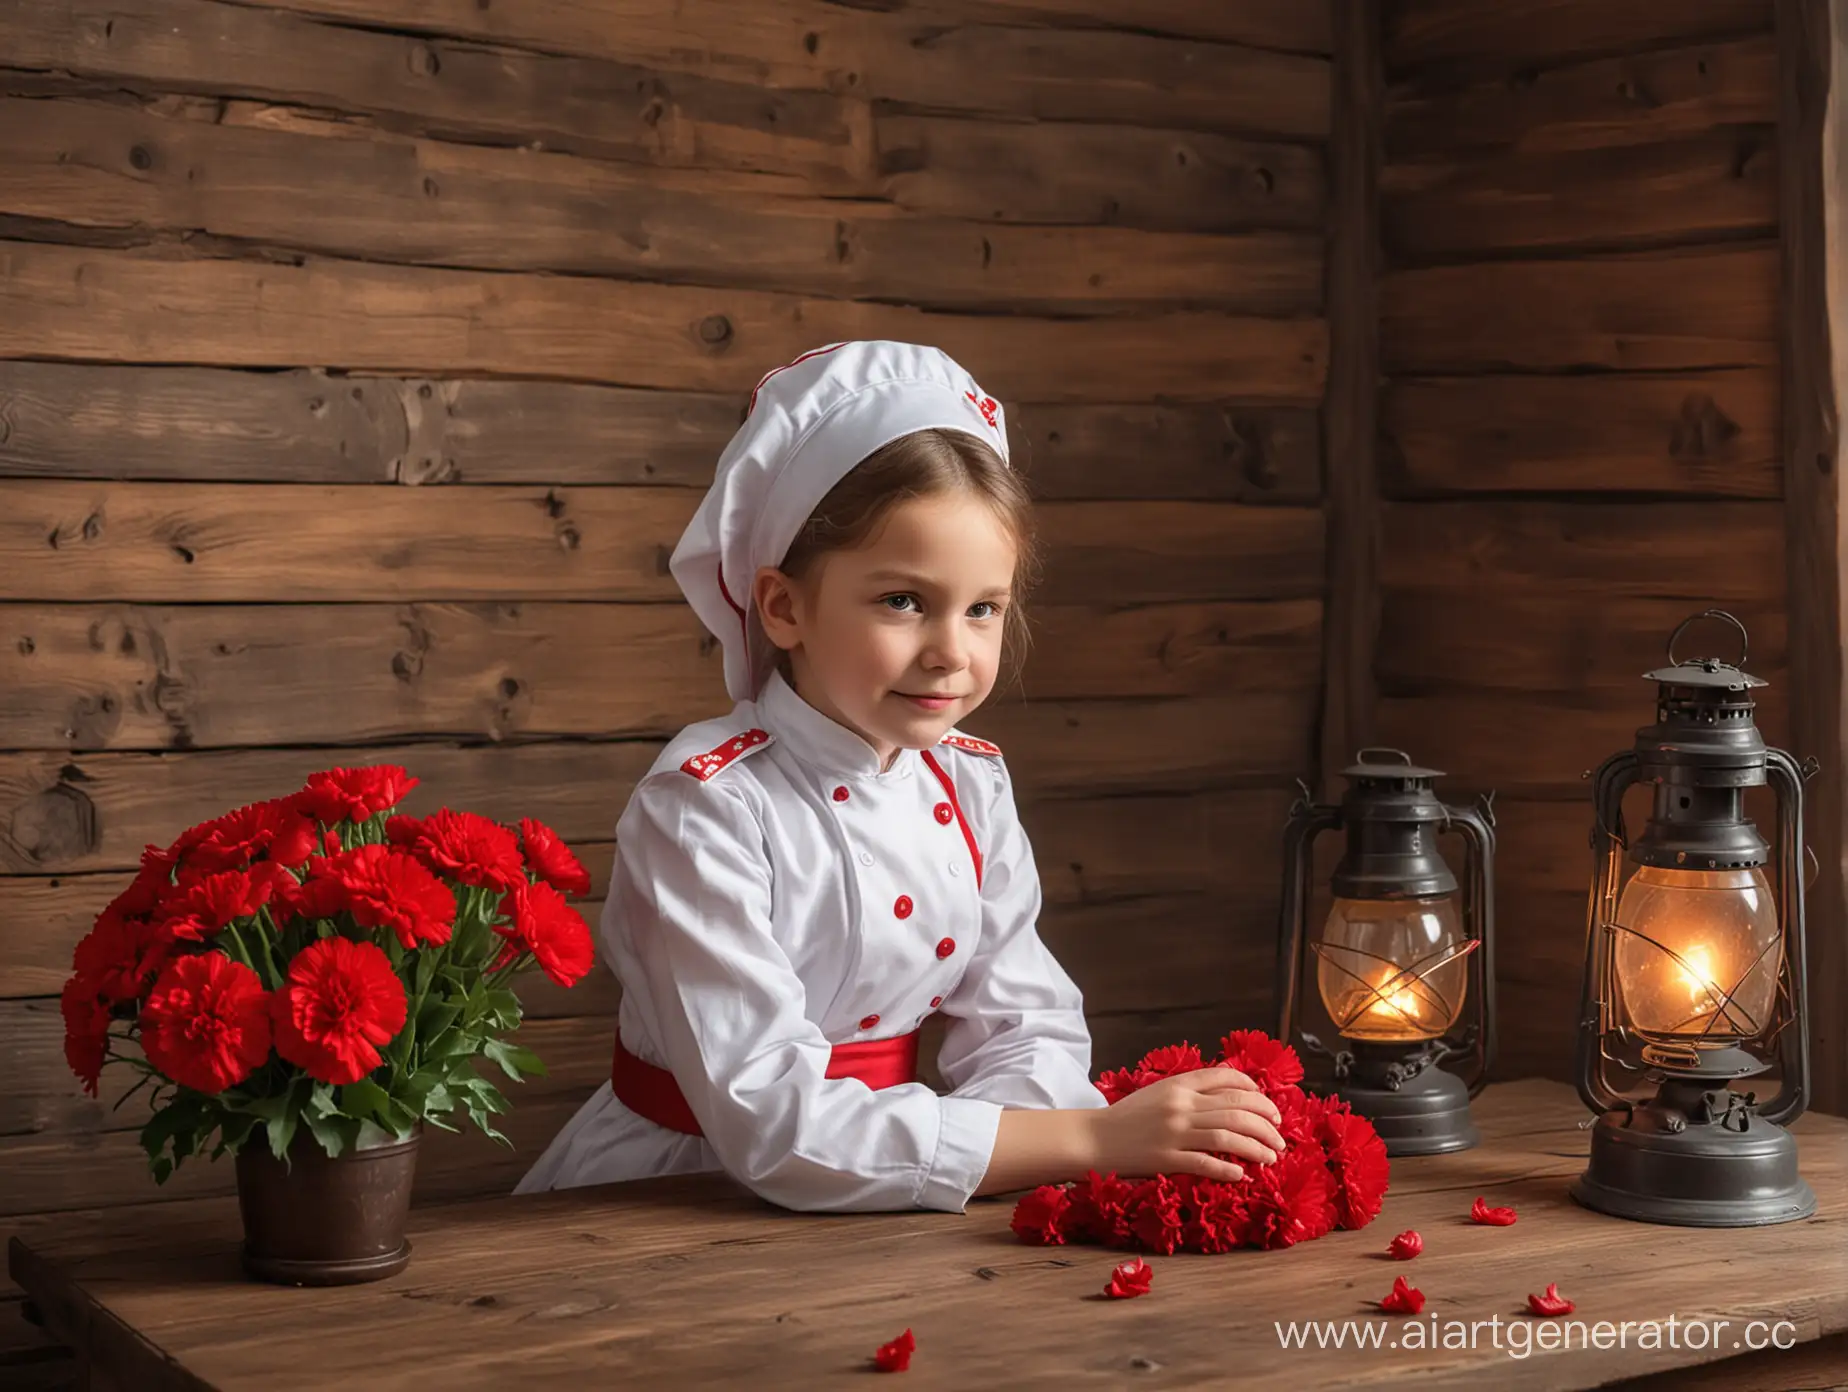 Soviet-Nurse-Costumed-Girl-with-Red-Carnations-and-Lantern-Light